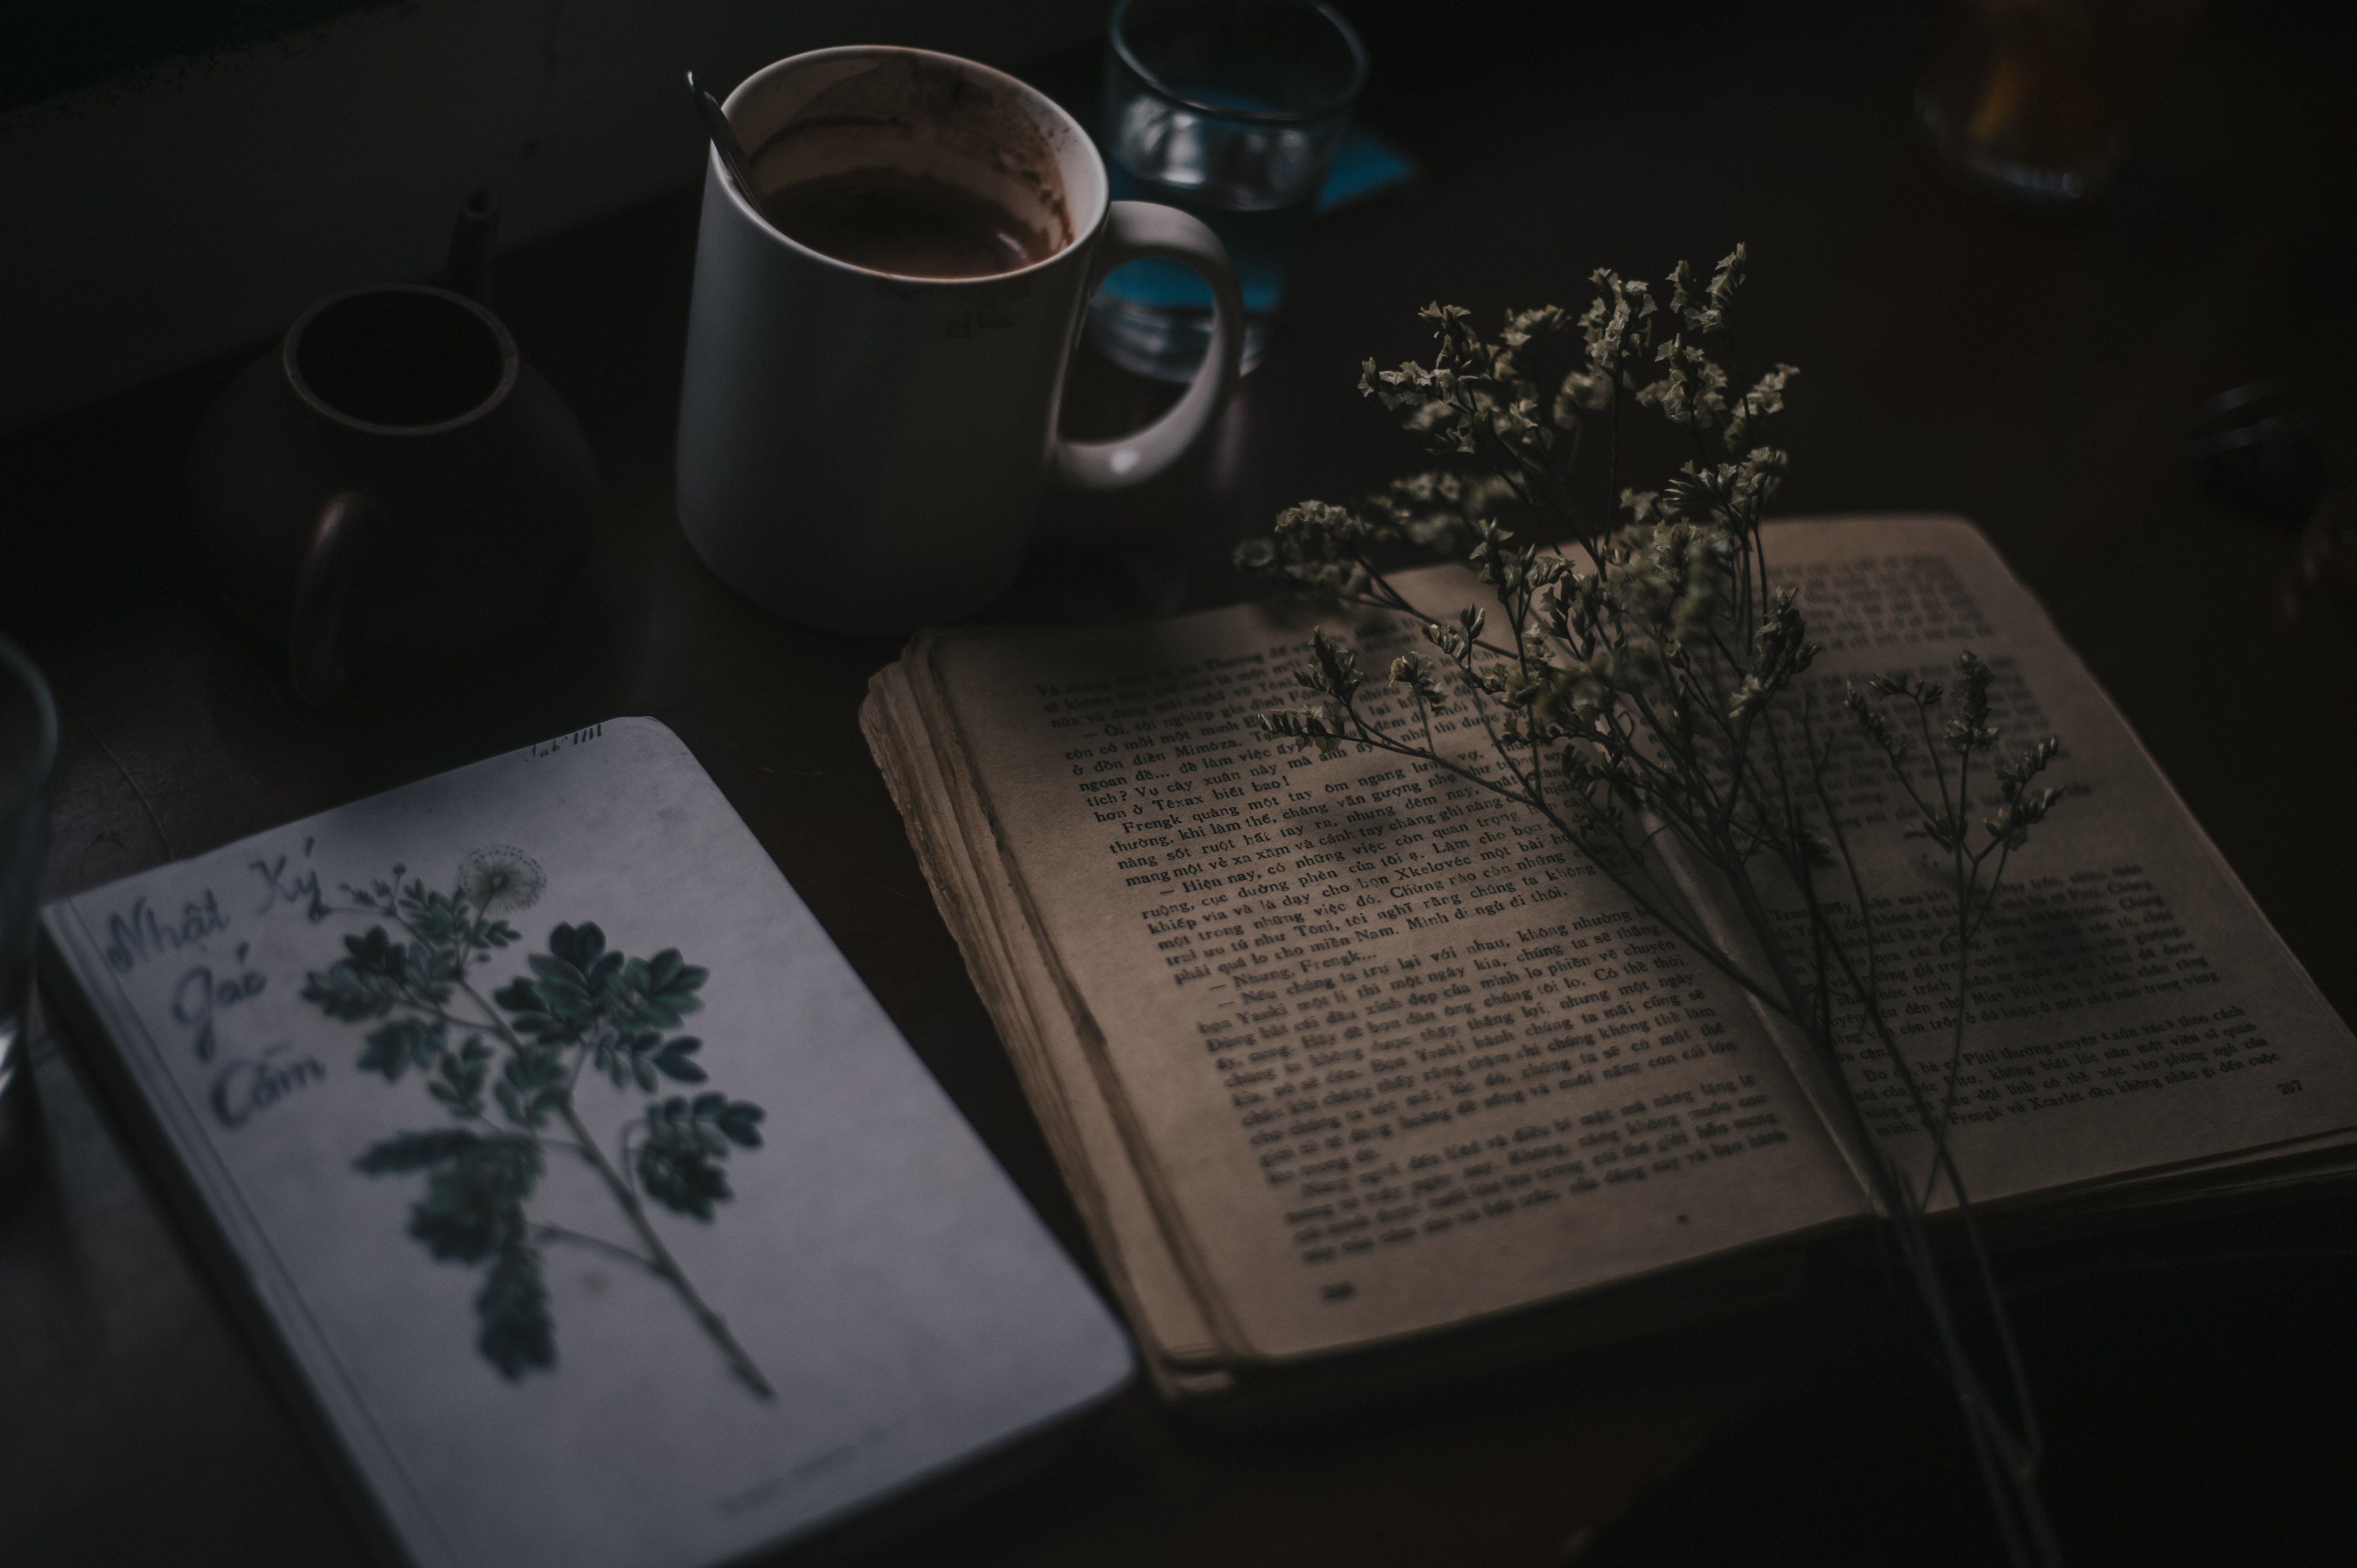 A cup of coffee sits next to an open book and a plant. - Vintage, dark academia, retro